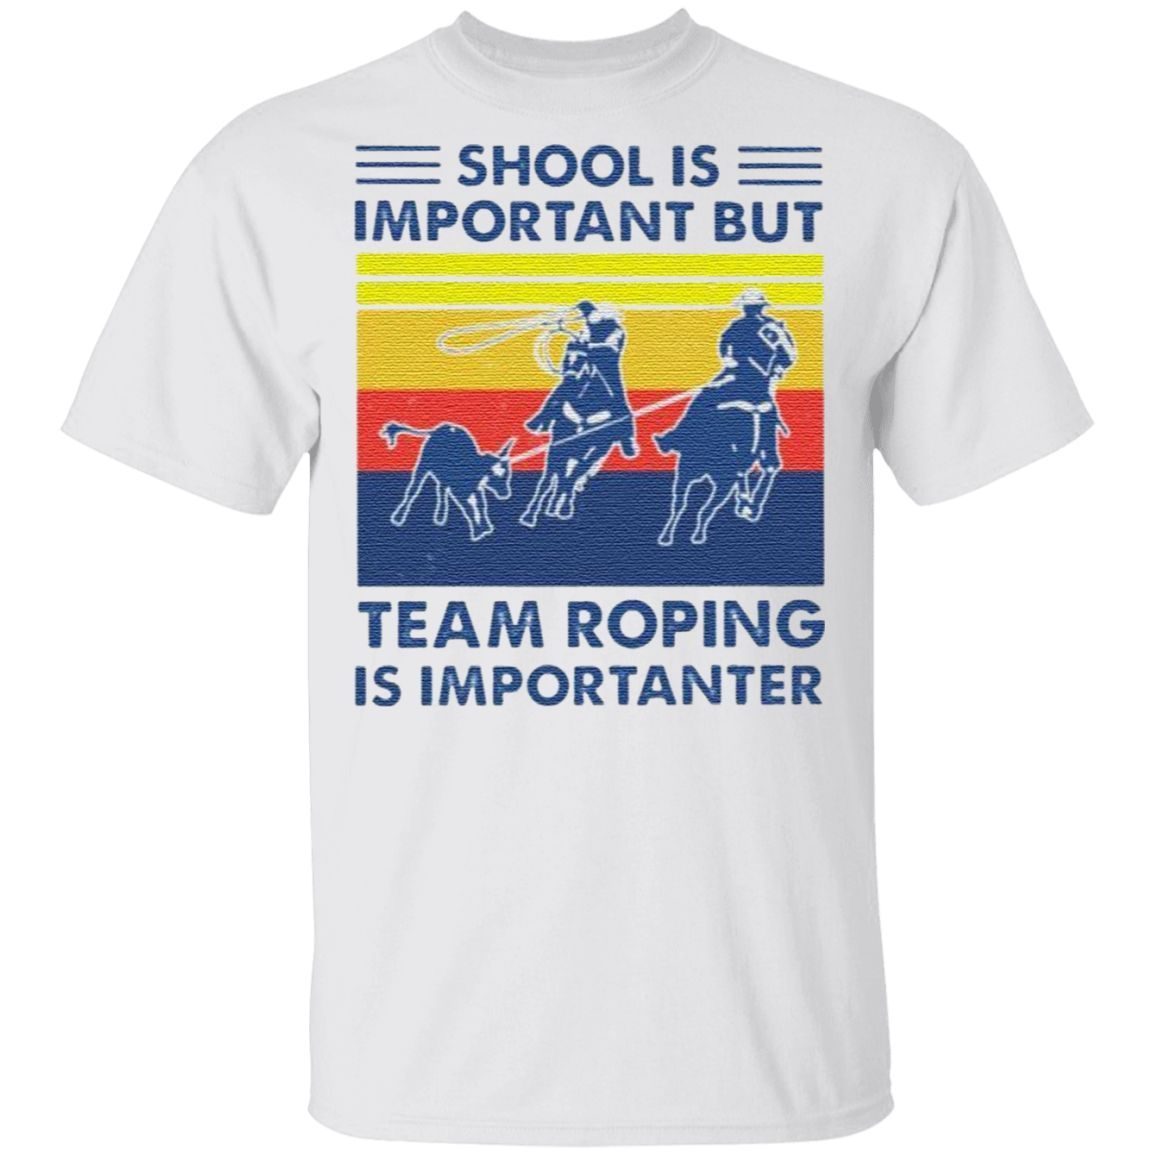 School is important but team roping is importanter vintage t shirt